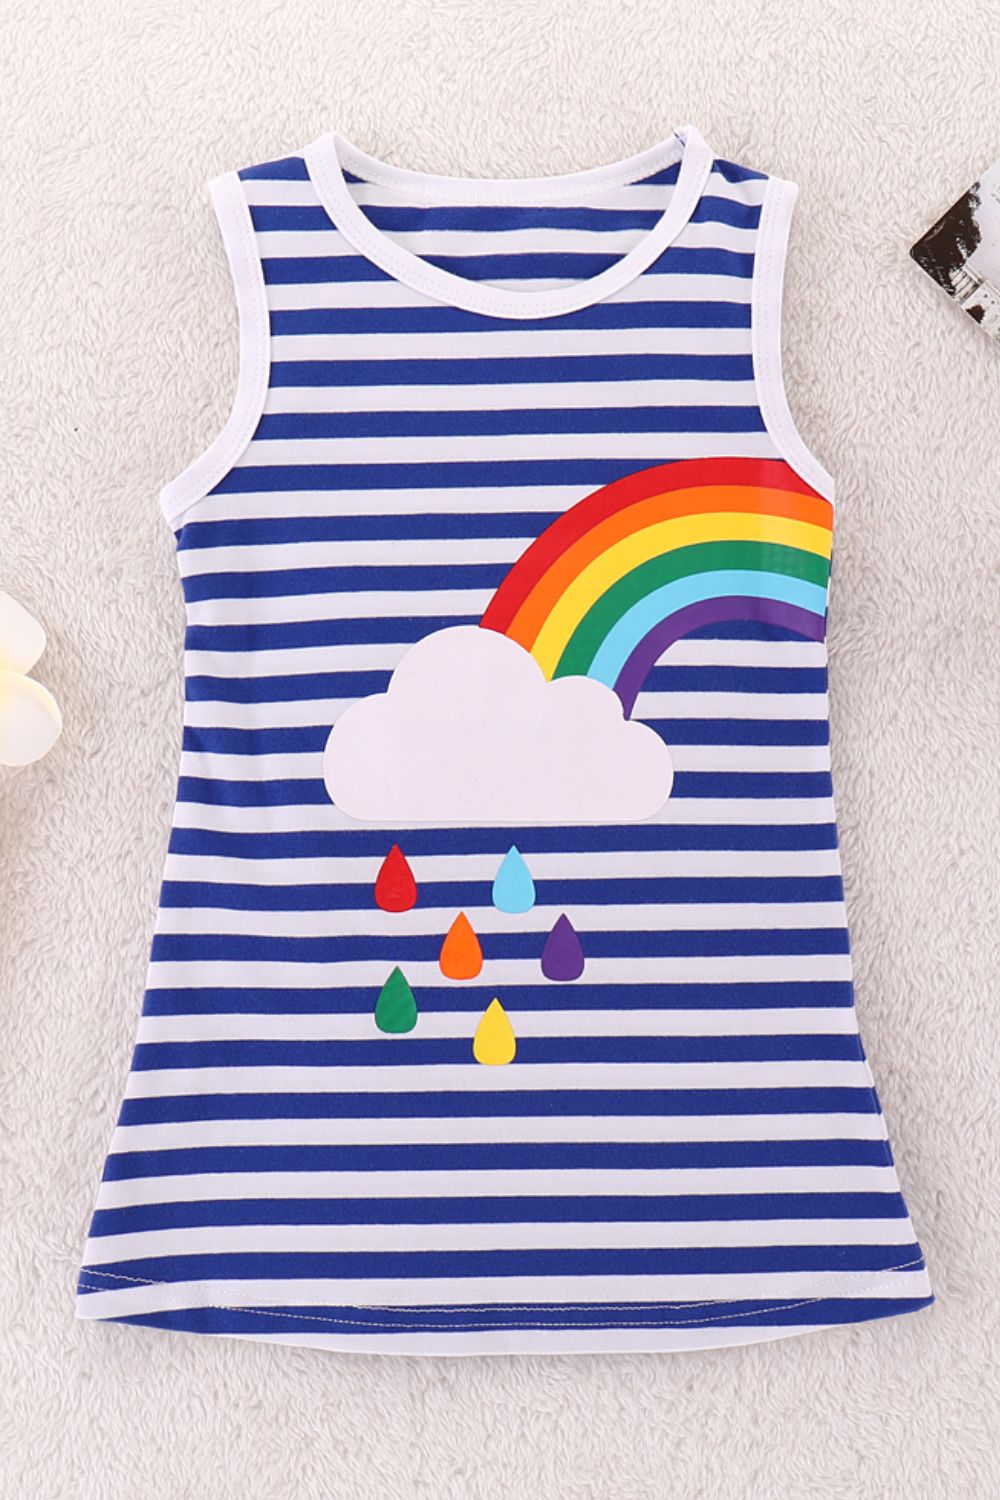 RAINBOW ON THE RIGHT - Girls Rainbow Graphic Striped Sleeveless Dress - toddlers top at TFC&H Co.